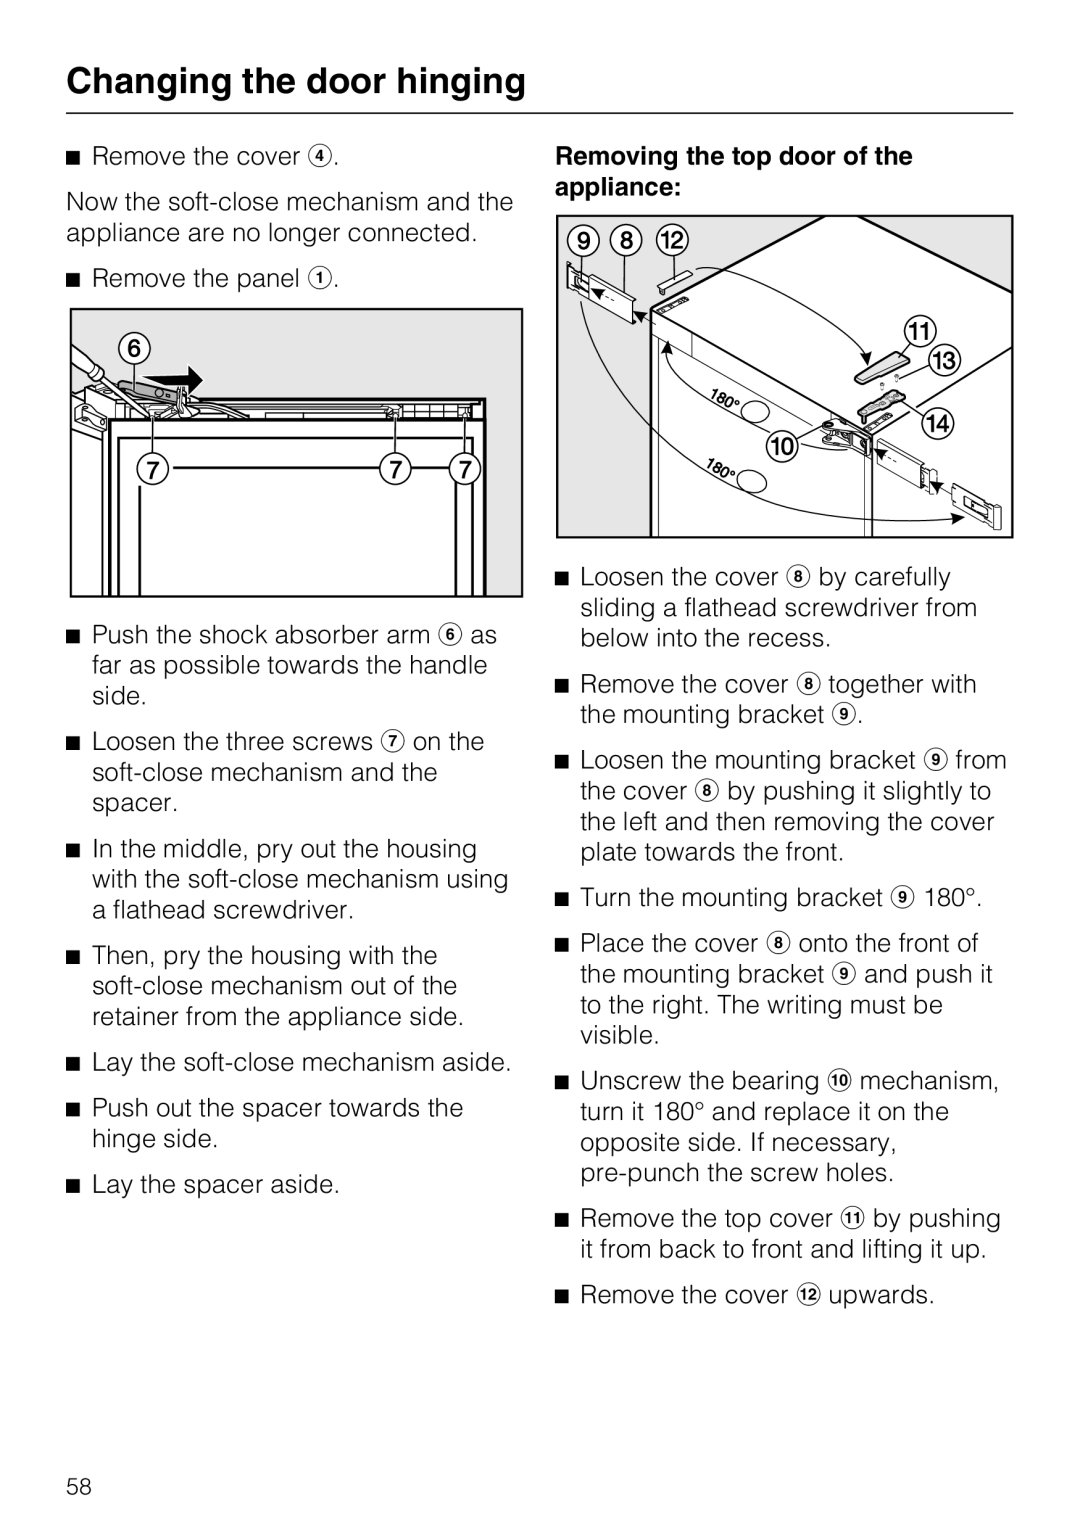 Miele KFN 14943 SDE ED installation instructions Removing the top door of the appliance, Changing the door hinging 